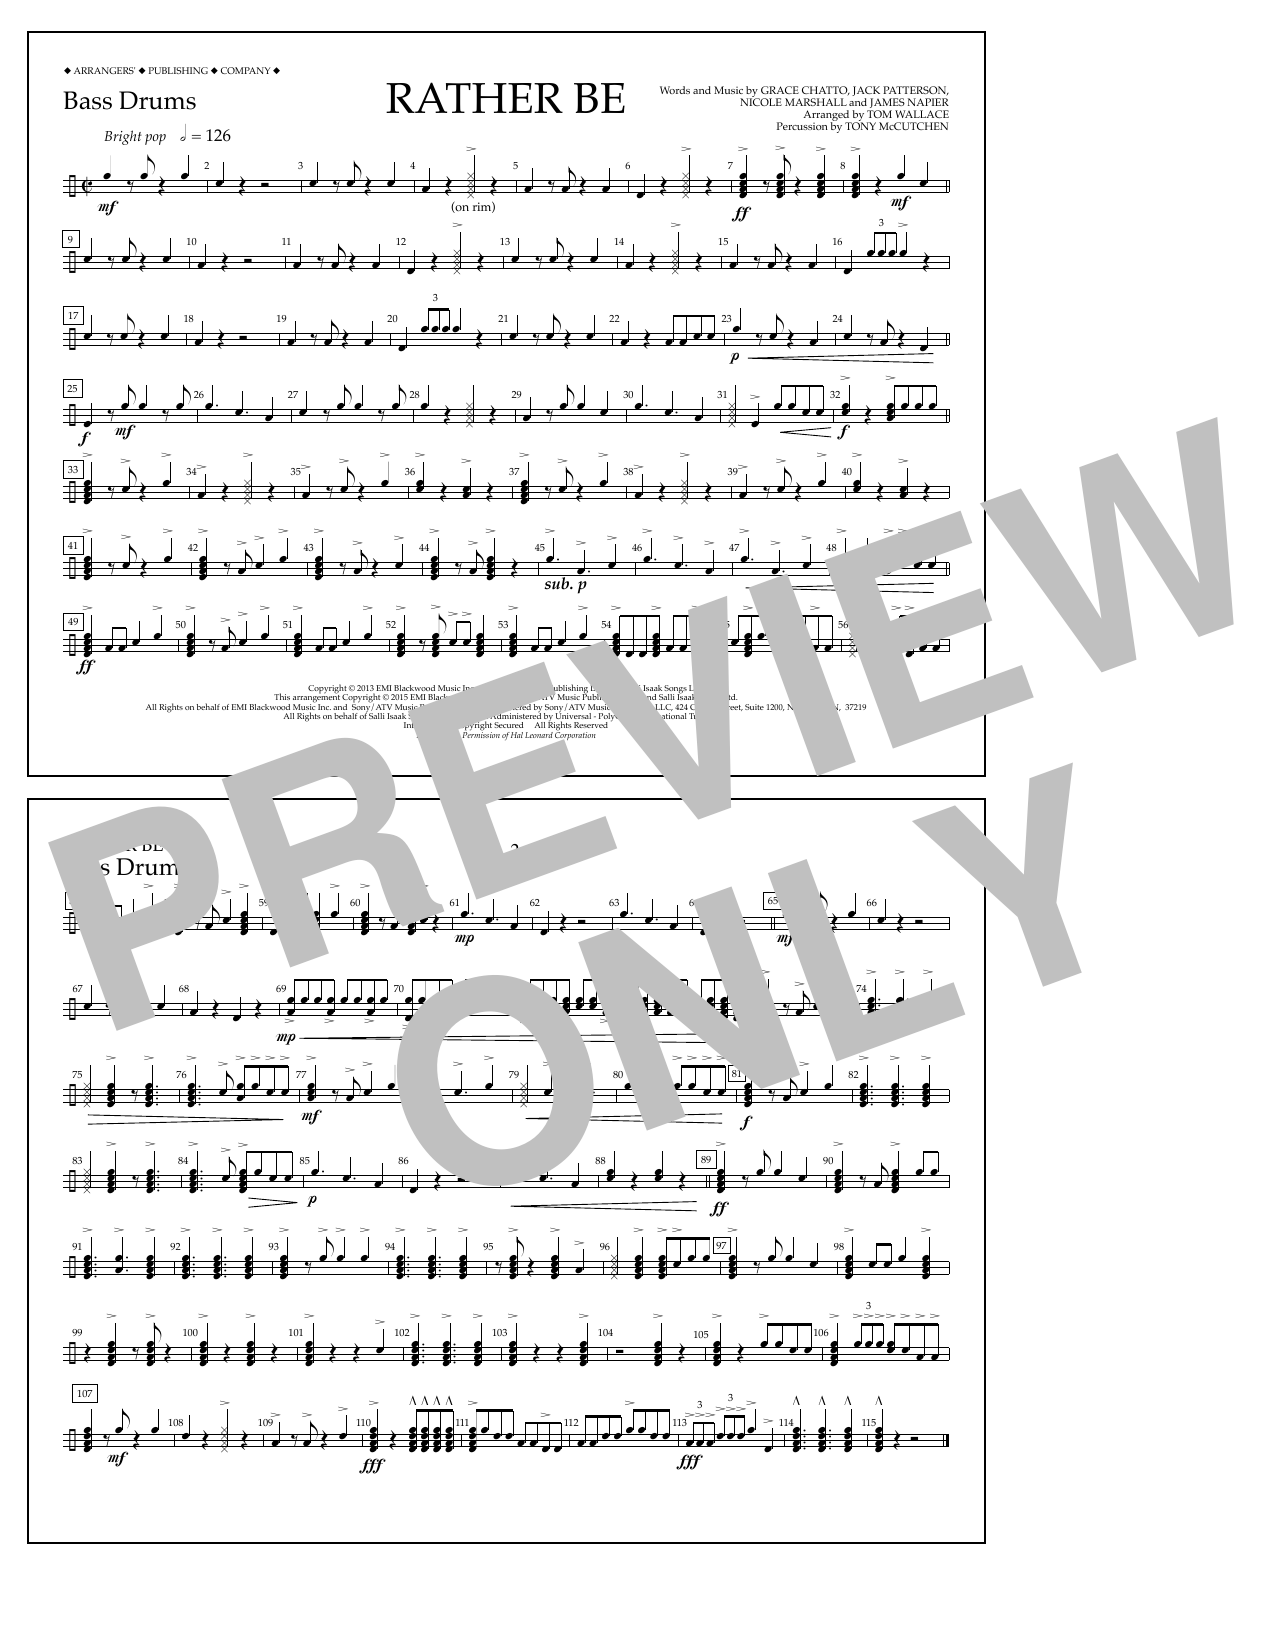 Download Tom Wallace Rather Be - Bass Drums Sheet Music